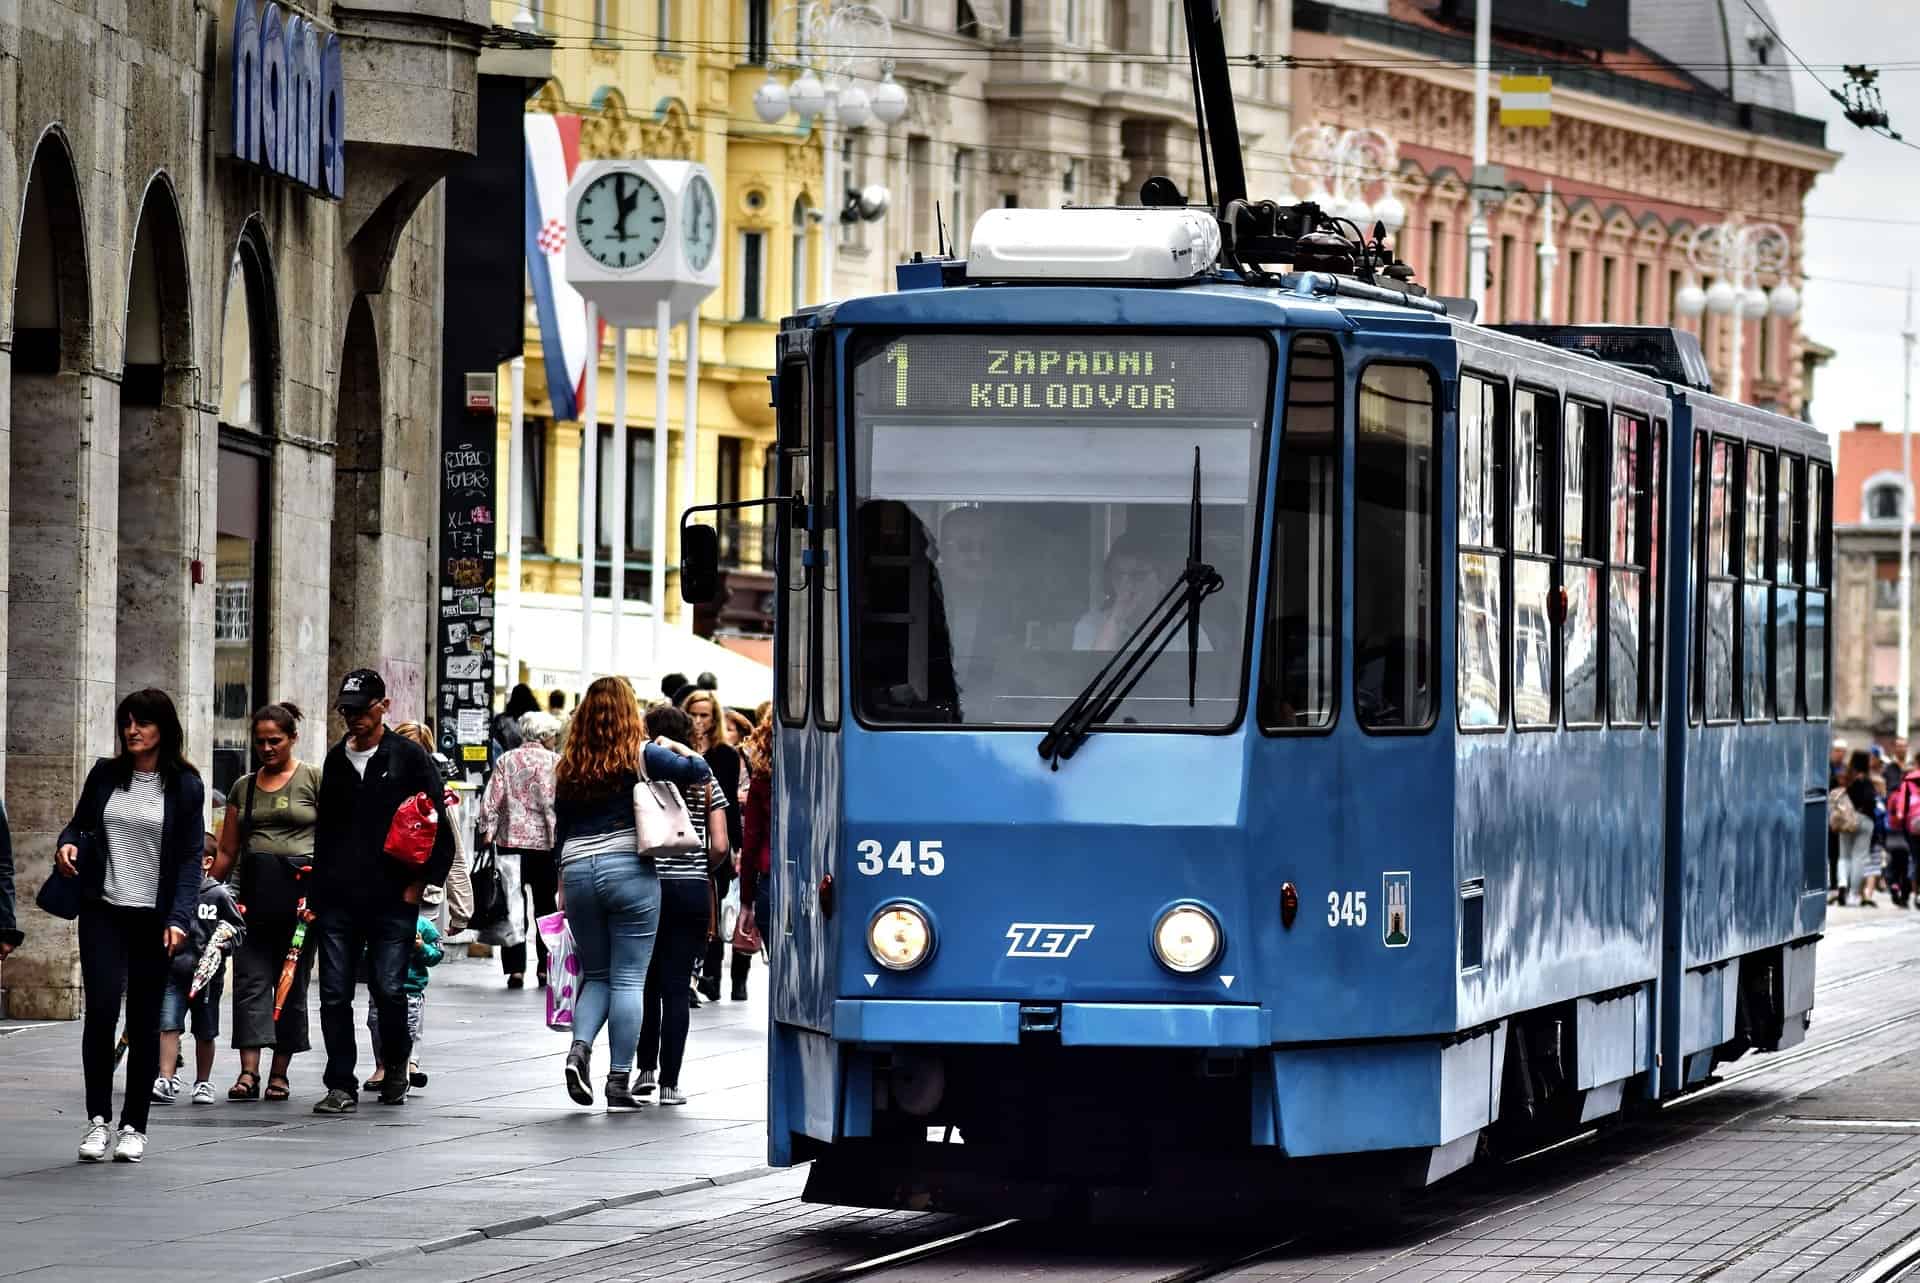 Best things to do in Zagreb Croatia - Christy Kranjec - Public streetcar by TheoRivierenlaan on Pixabay